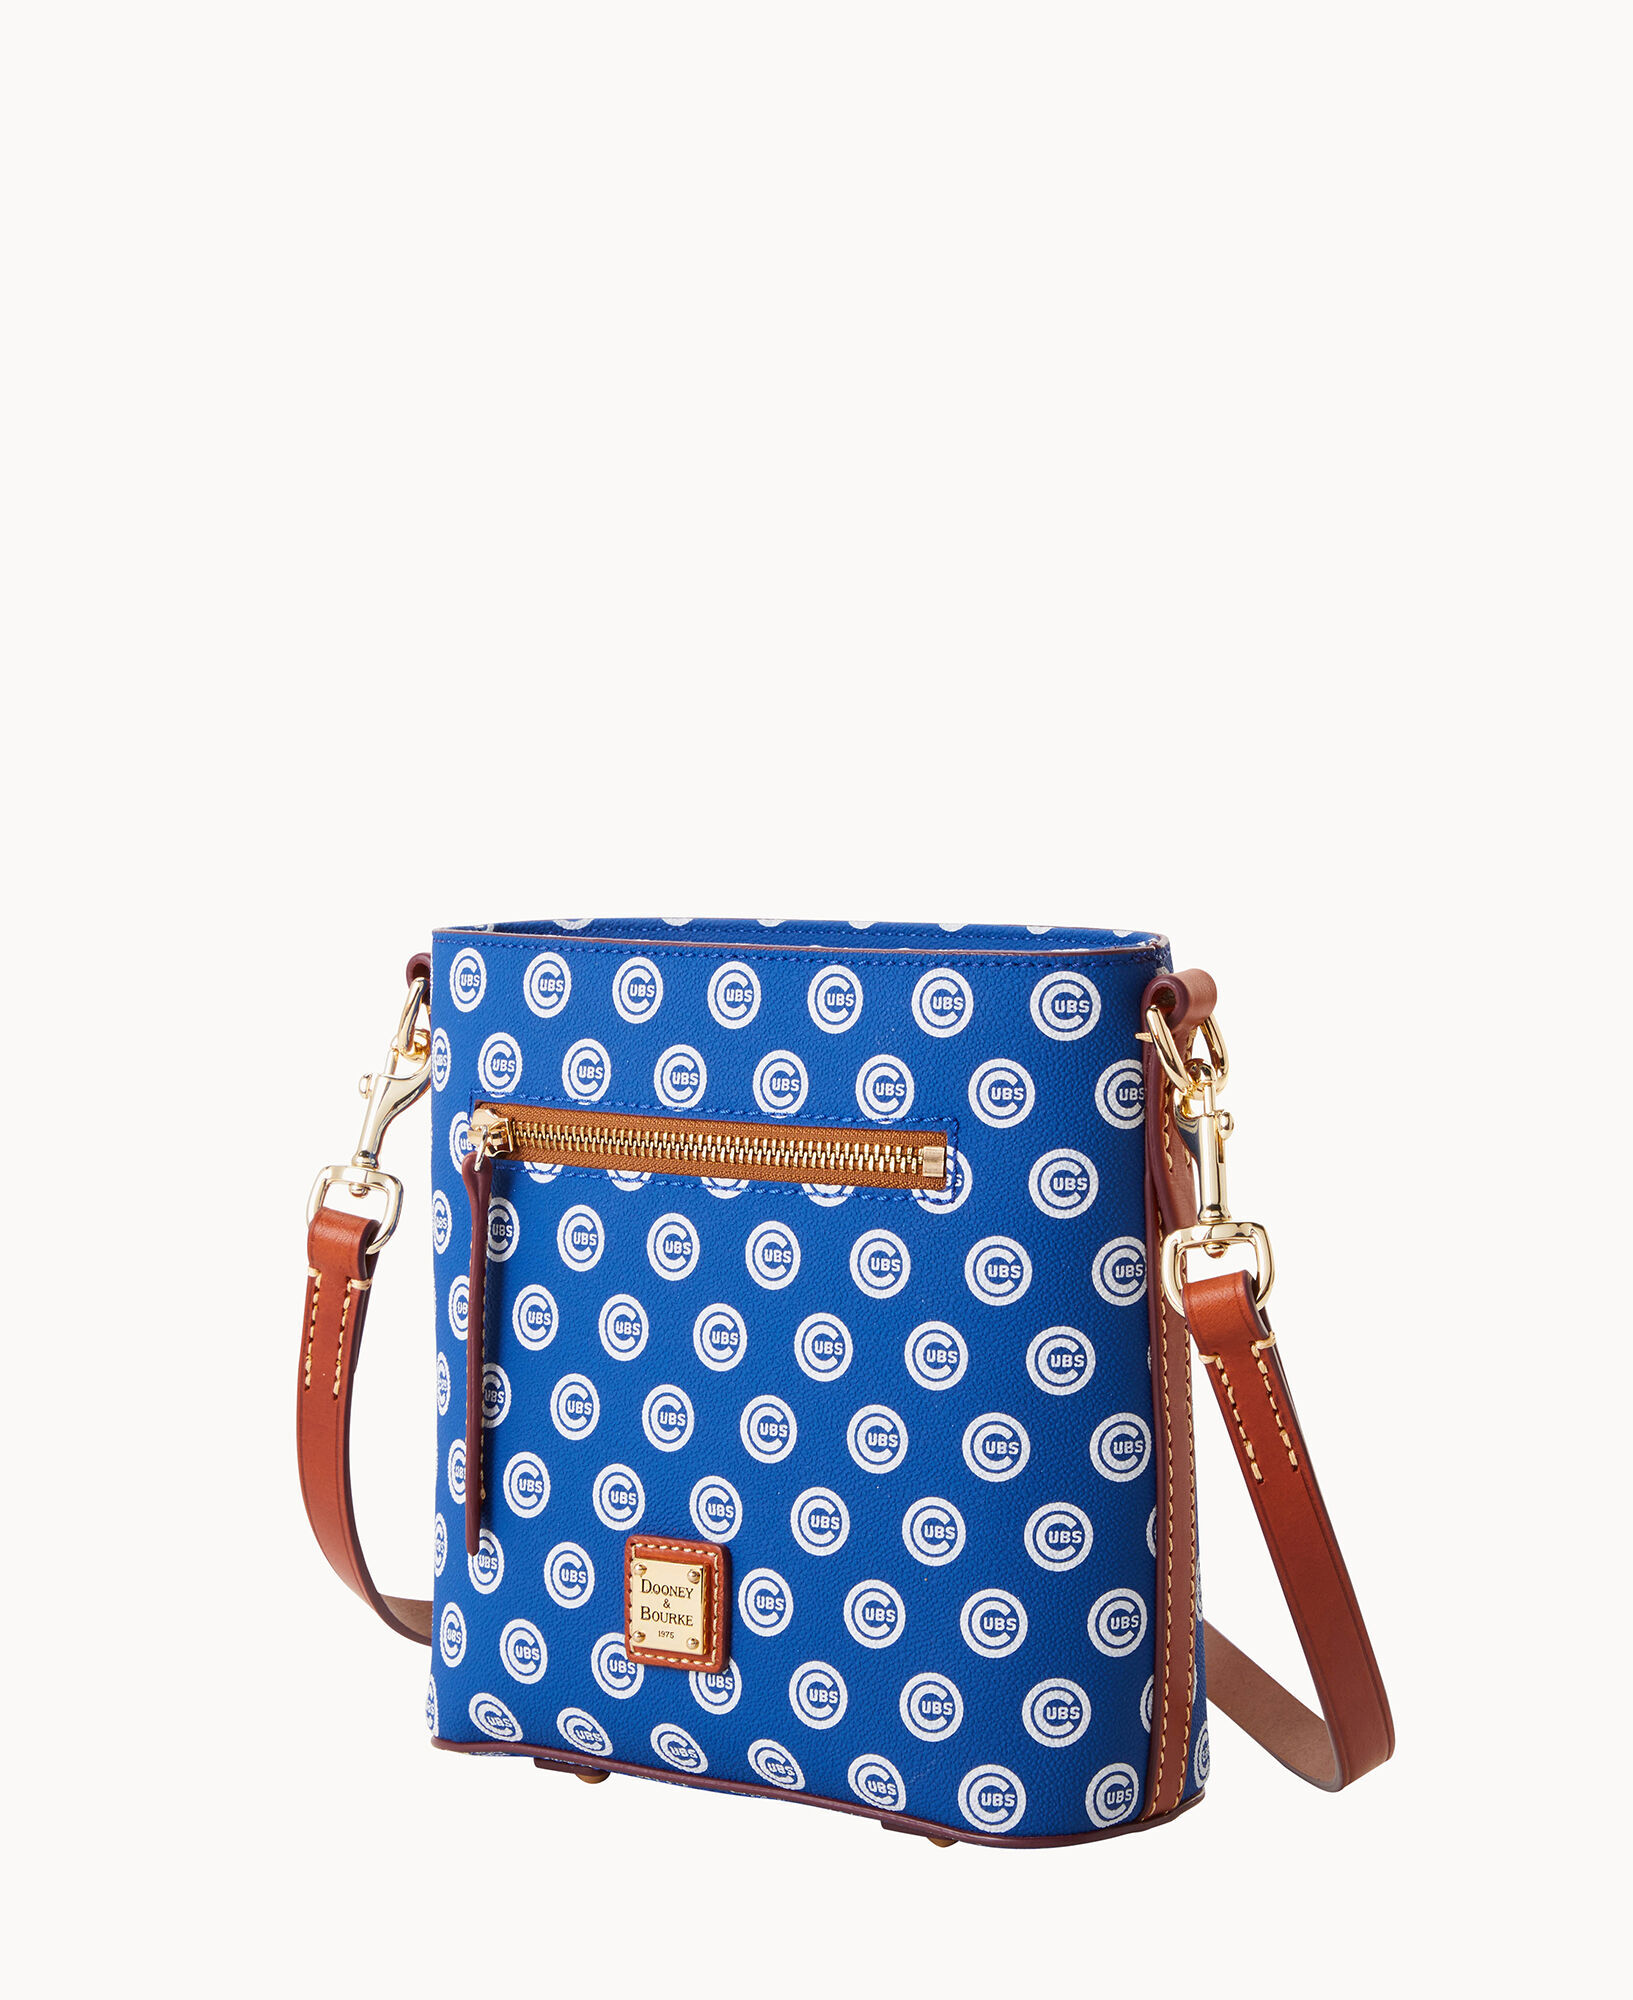 Dooney & Bourke Mlb Chicago Cubs North/south Triple Zip Crossbody, Crossbody Bags, Clothing & Accessories